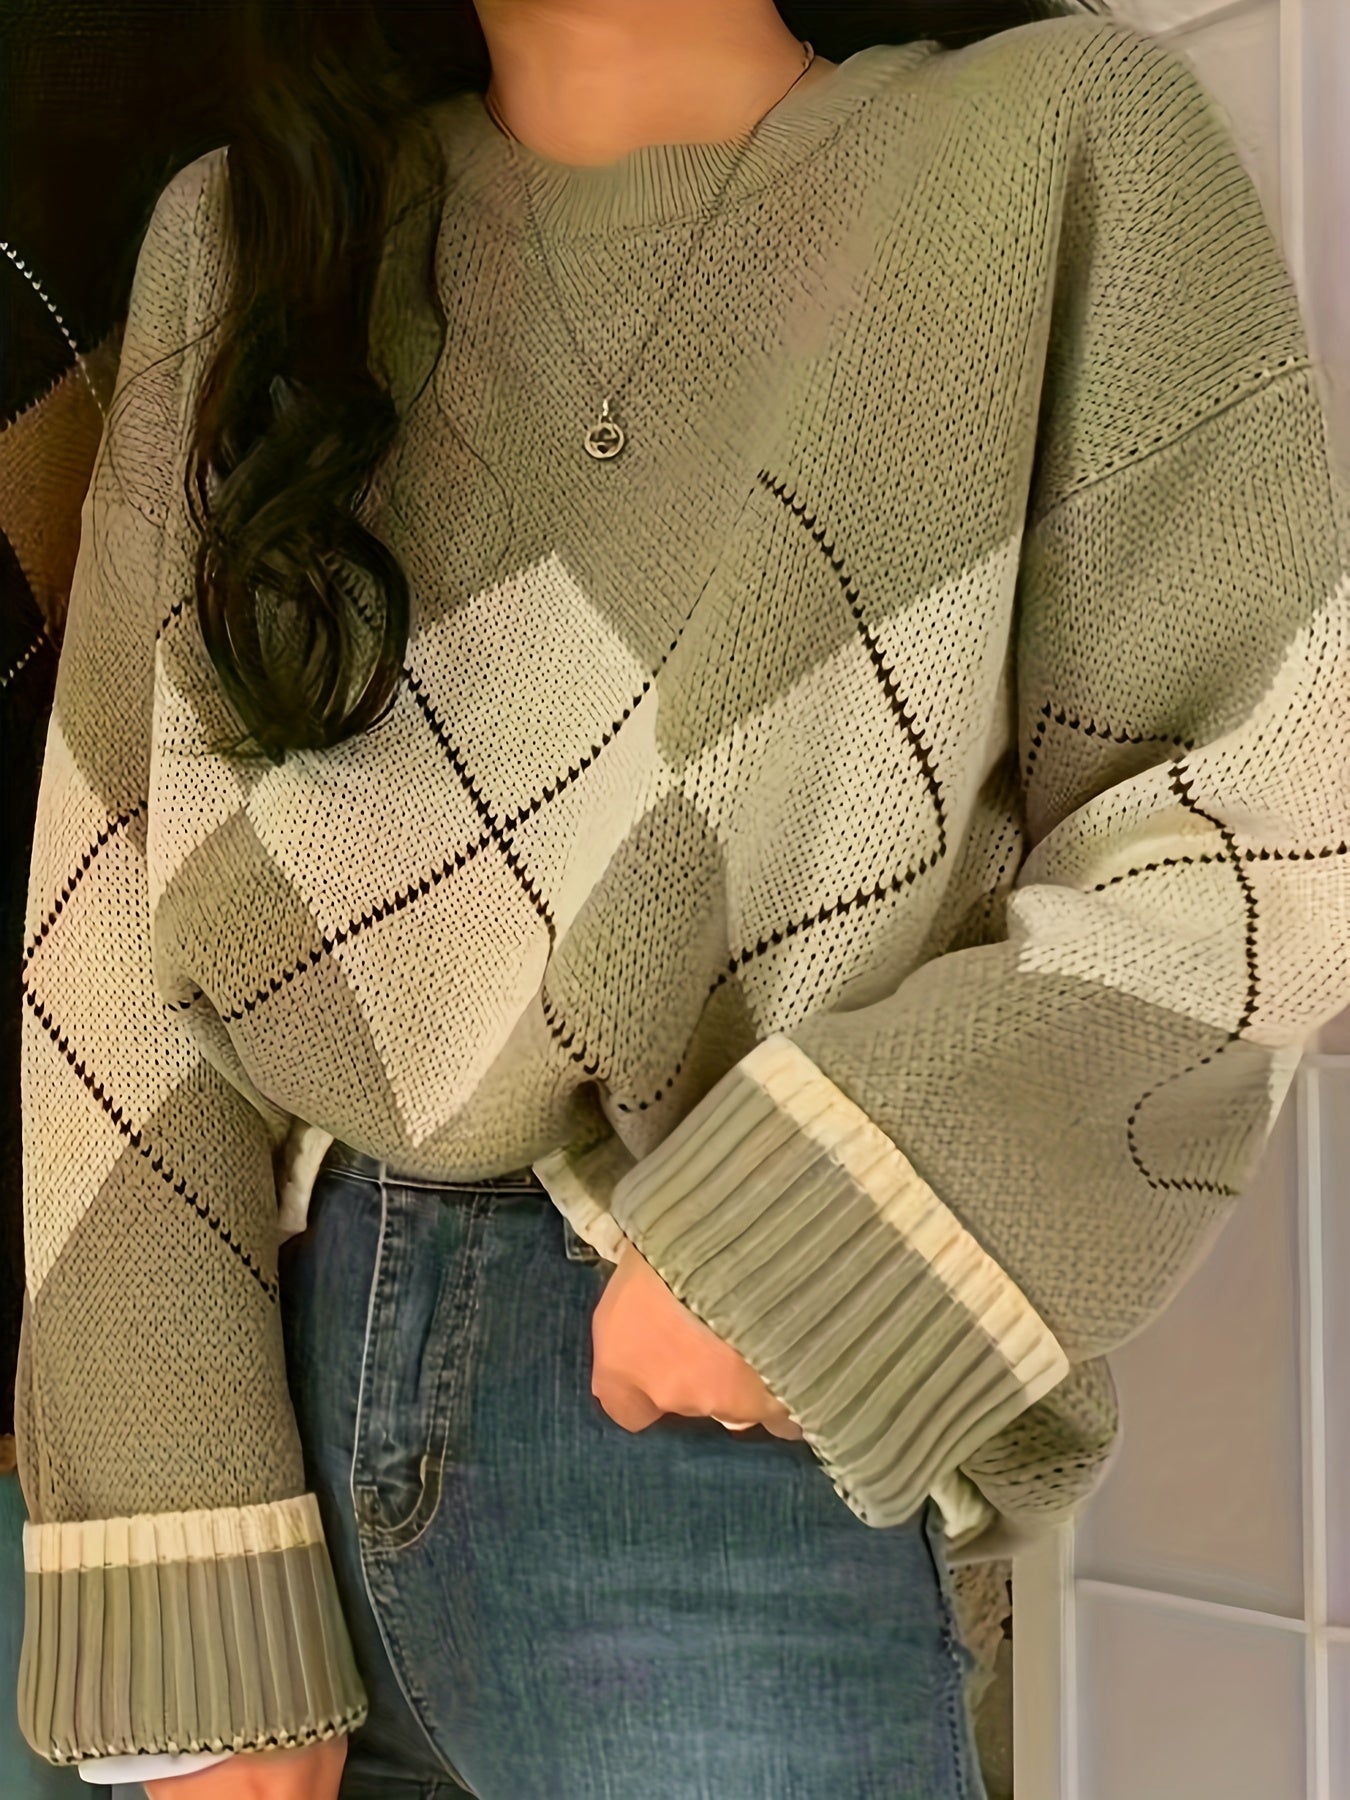 vlovelaw  Argyle Pattern Crew Neck Pullover Sweater, Vintage Long Sleeve Loose Sweater, Women's Clothing